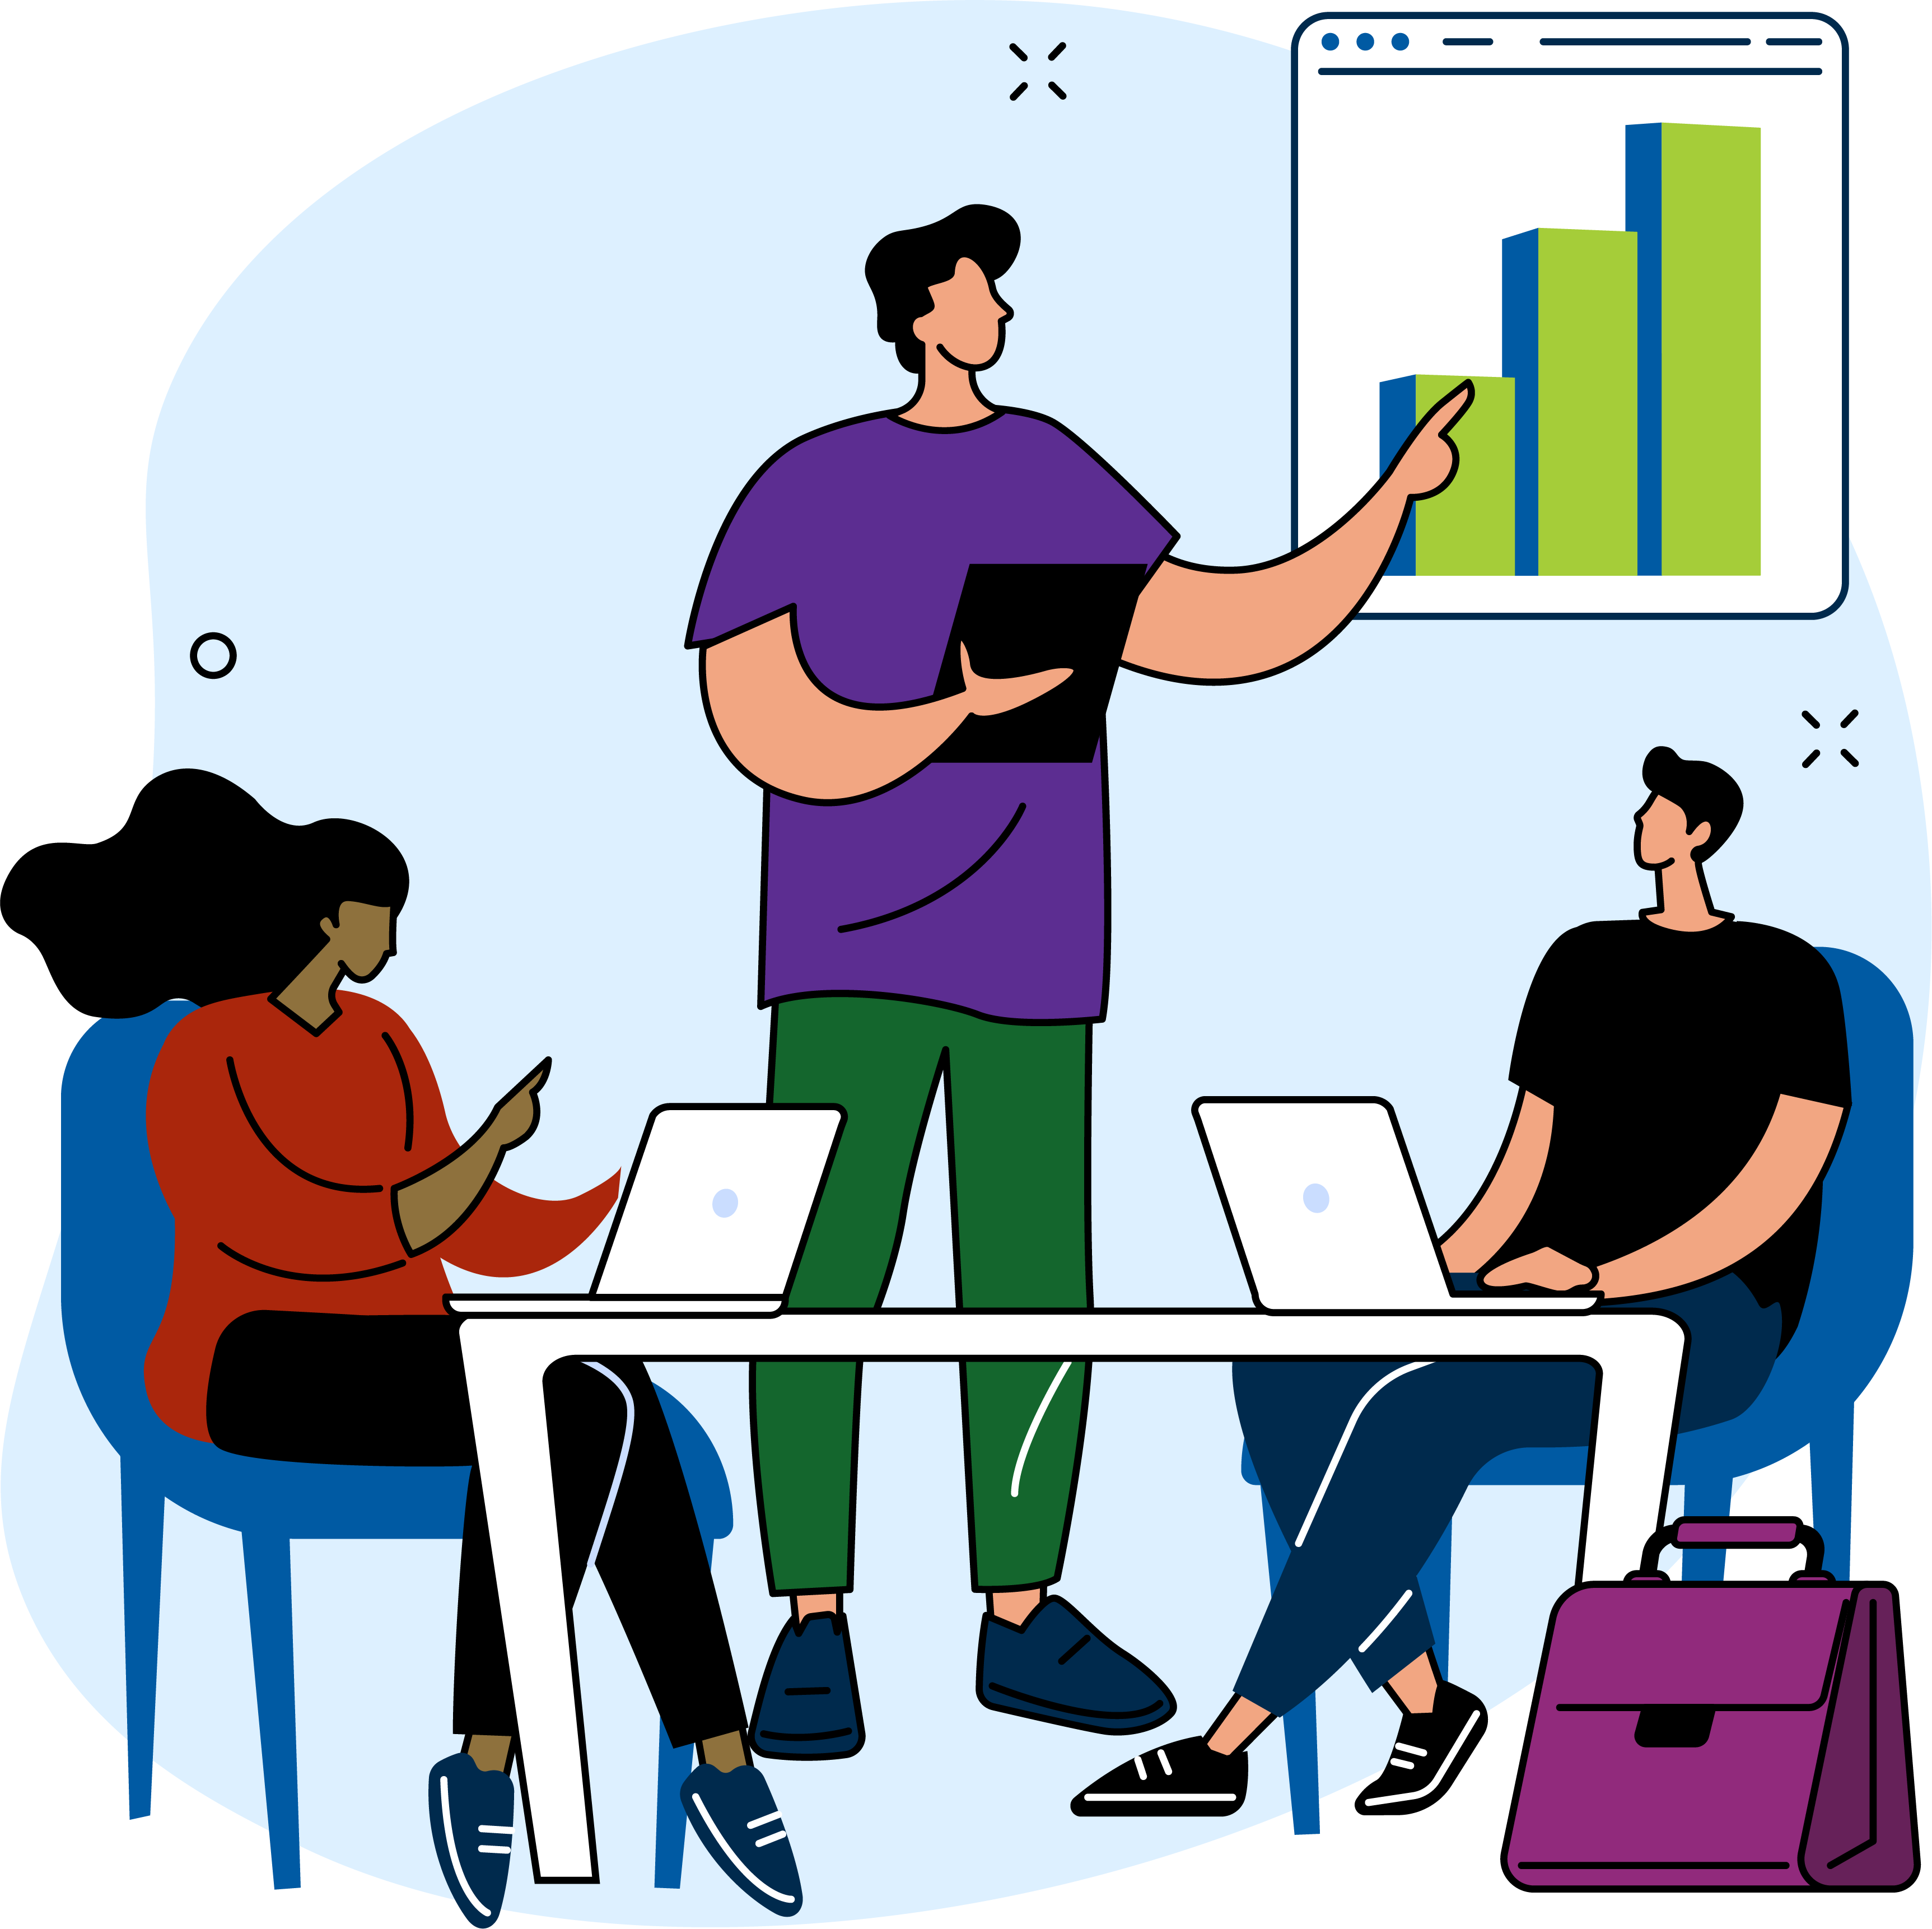 Illustration of two people seated with their laptops and paying attention to another person as he presents a bar chart with an upward trend.